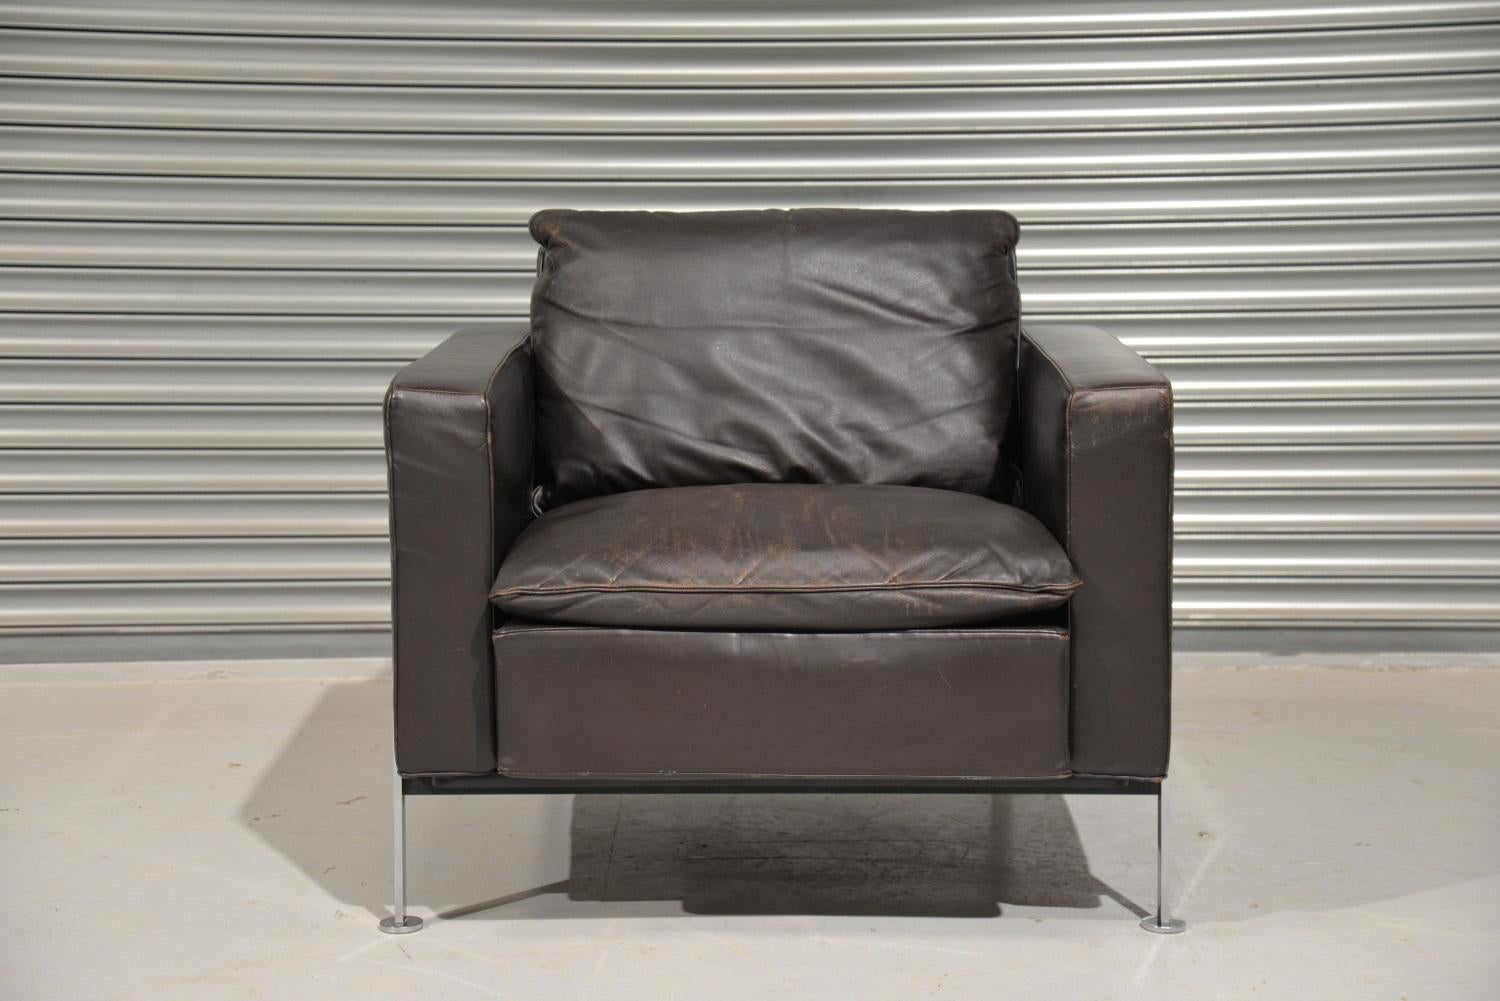 Discounted airfreight for our US and International customers (from 2 weeks door to door).

We are delighted to bring to you a Robert Haussmann RH 302 armchair manufactured by Hans Kaufeld.
This model is most desirable the first early production for